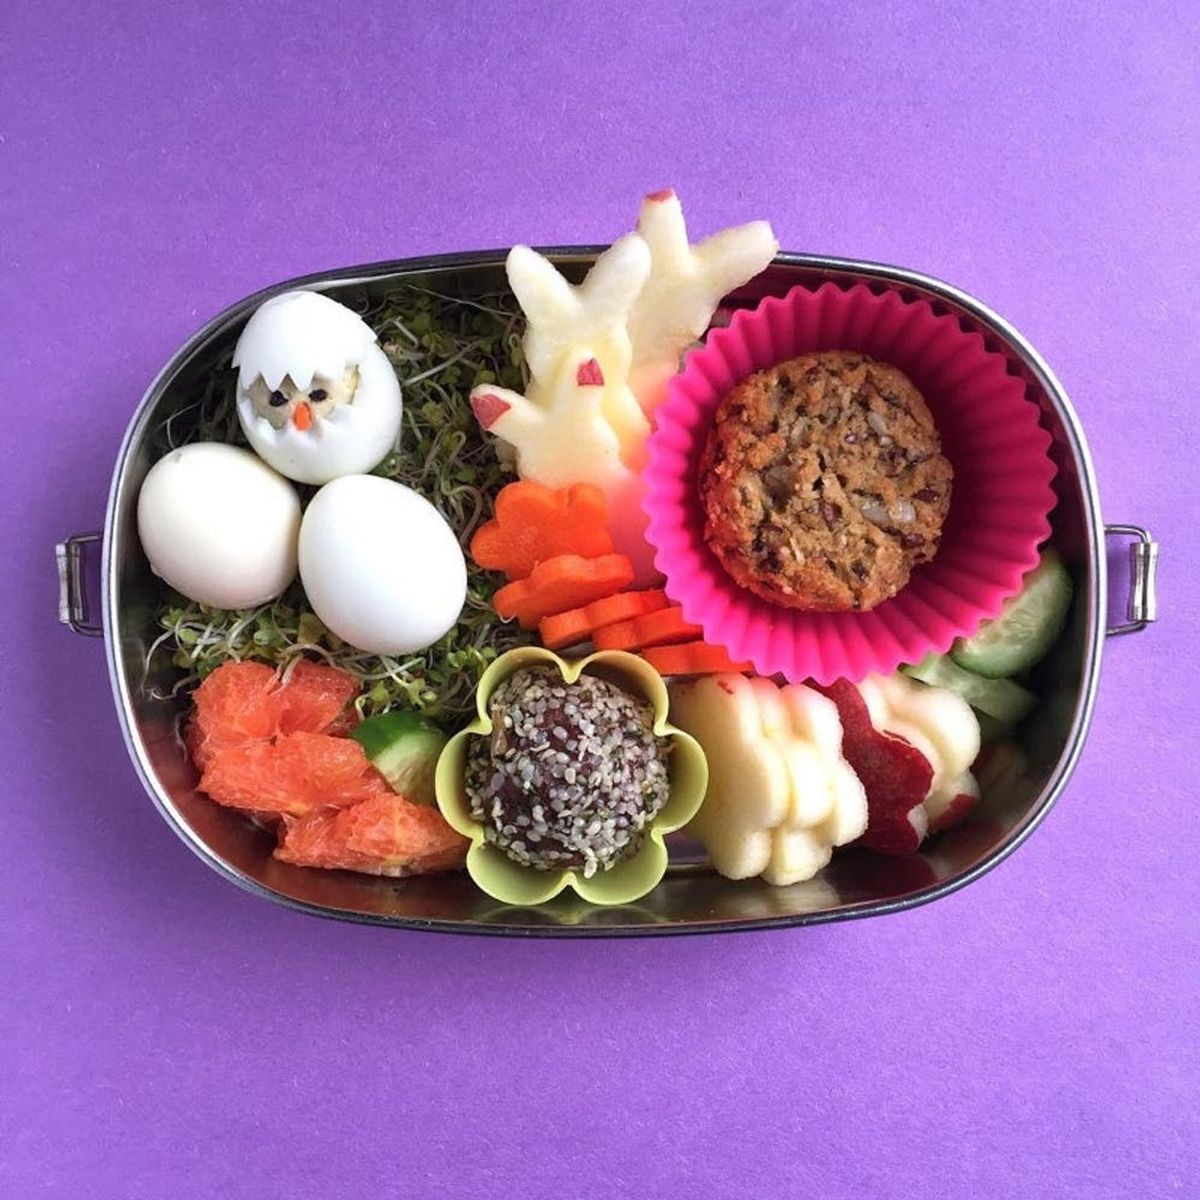 10 Colorful Instagram Accounts to Follow for Kid-Friendly Food Ideas